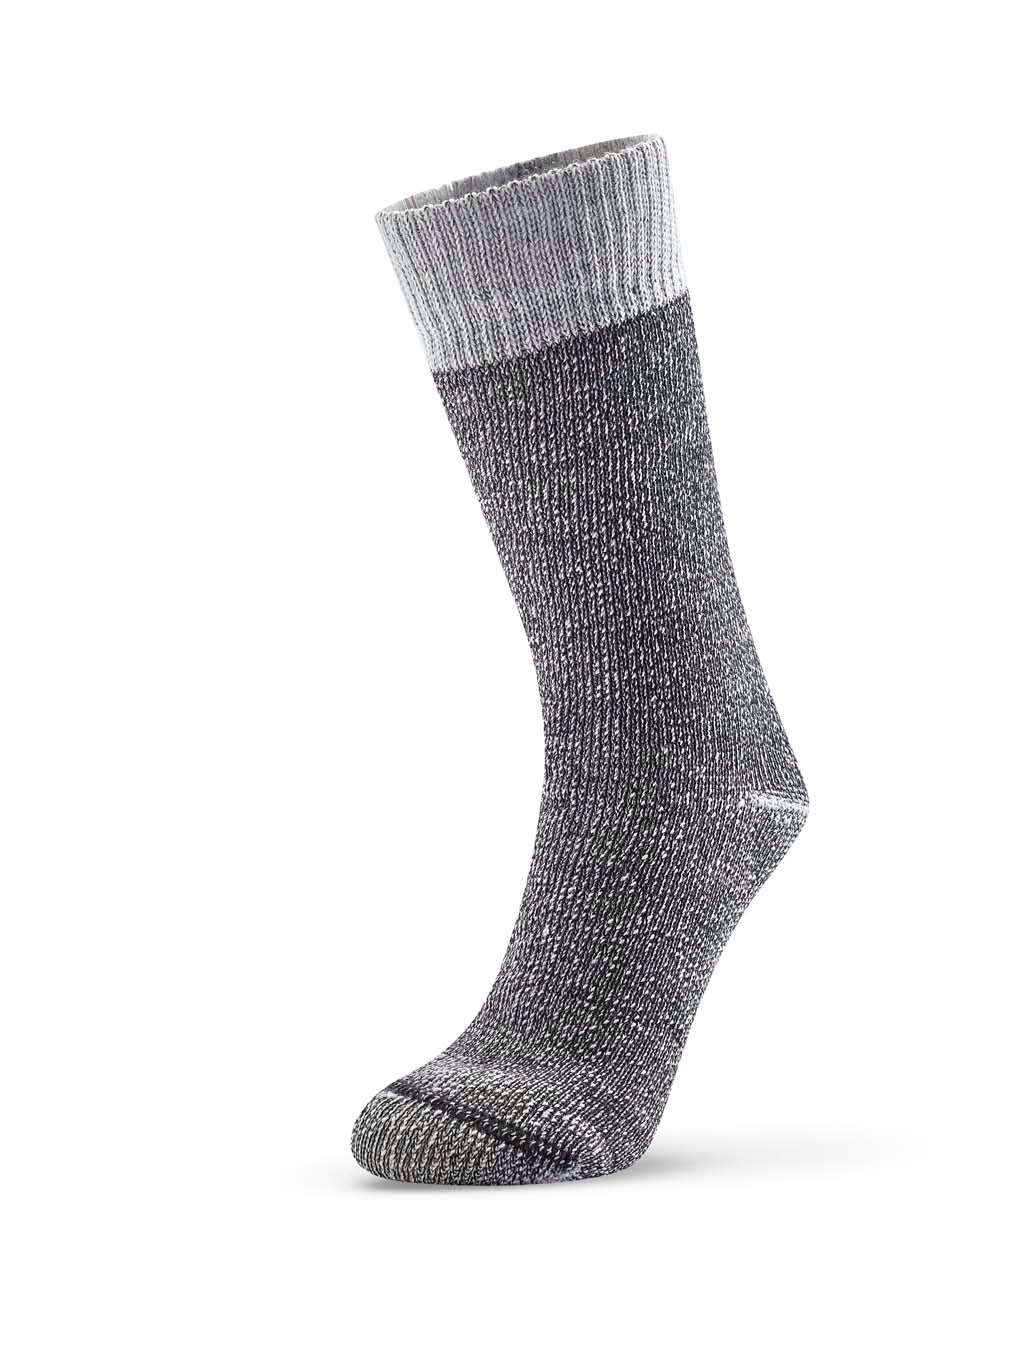 High Country Socks 3 Pack - Charcoal